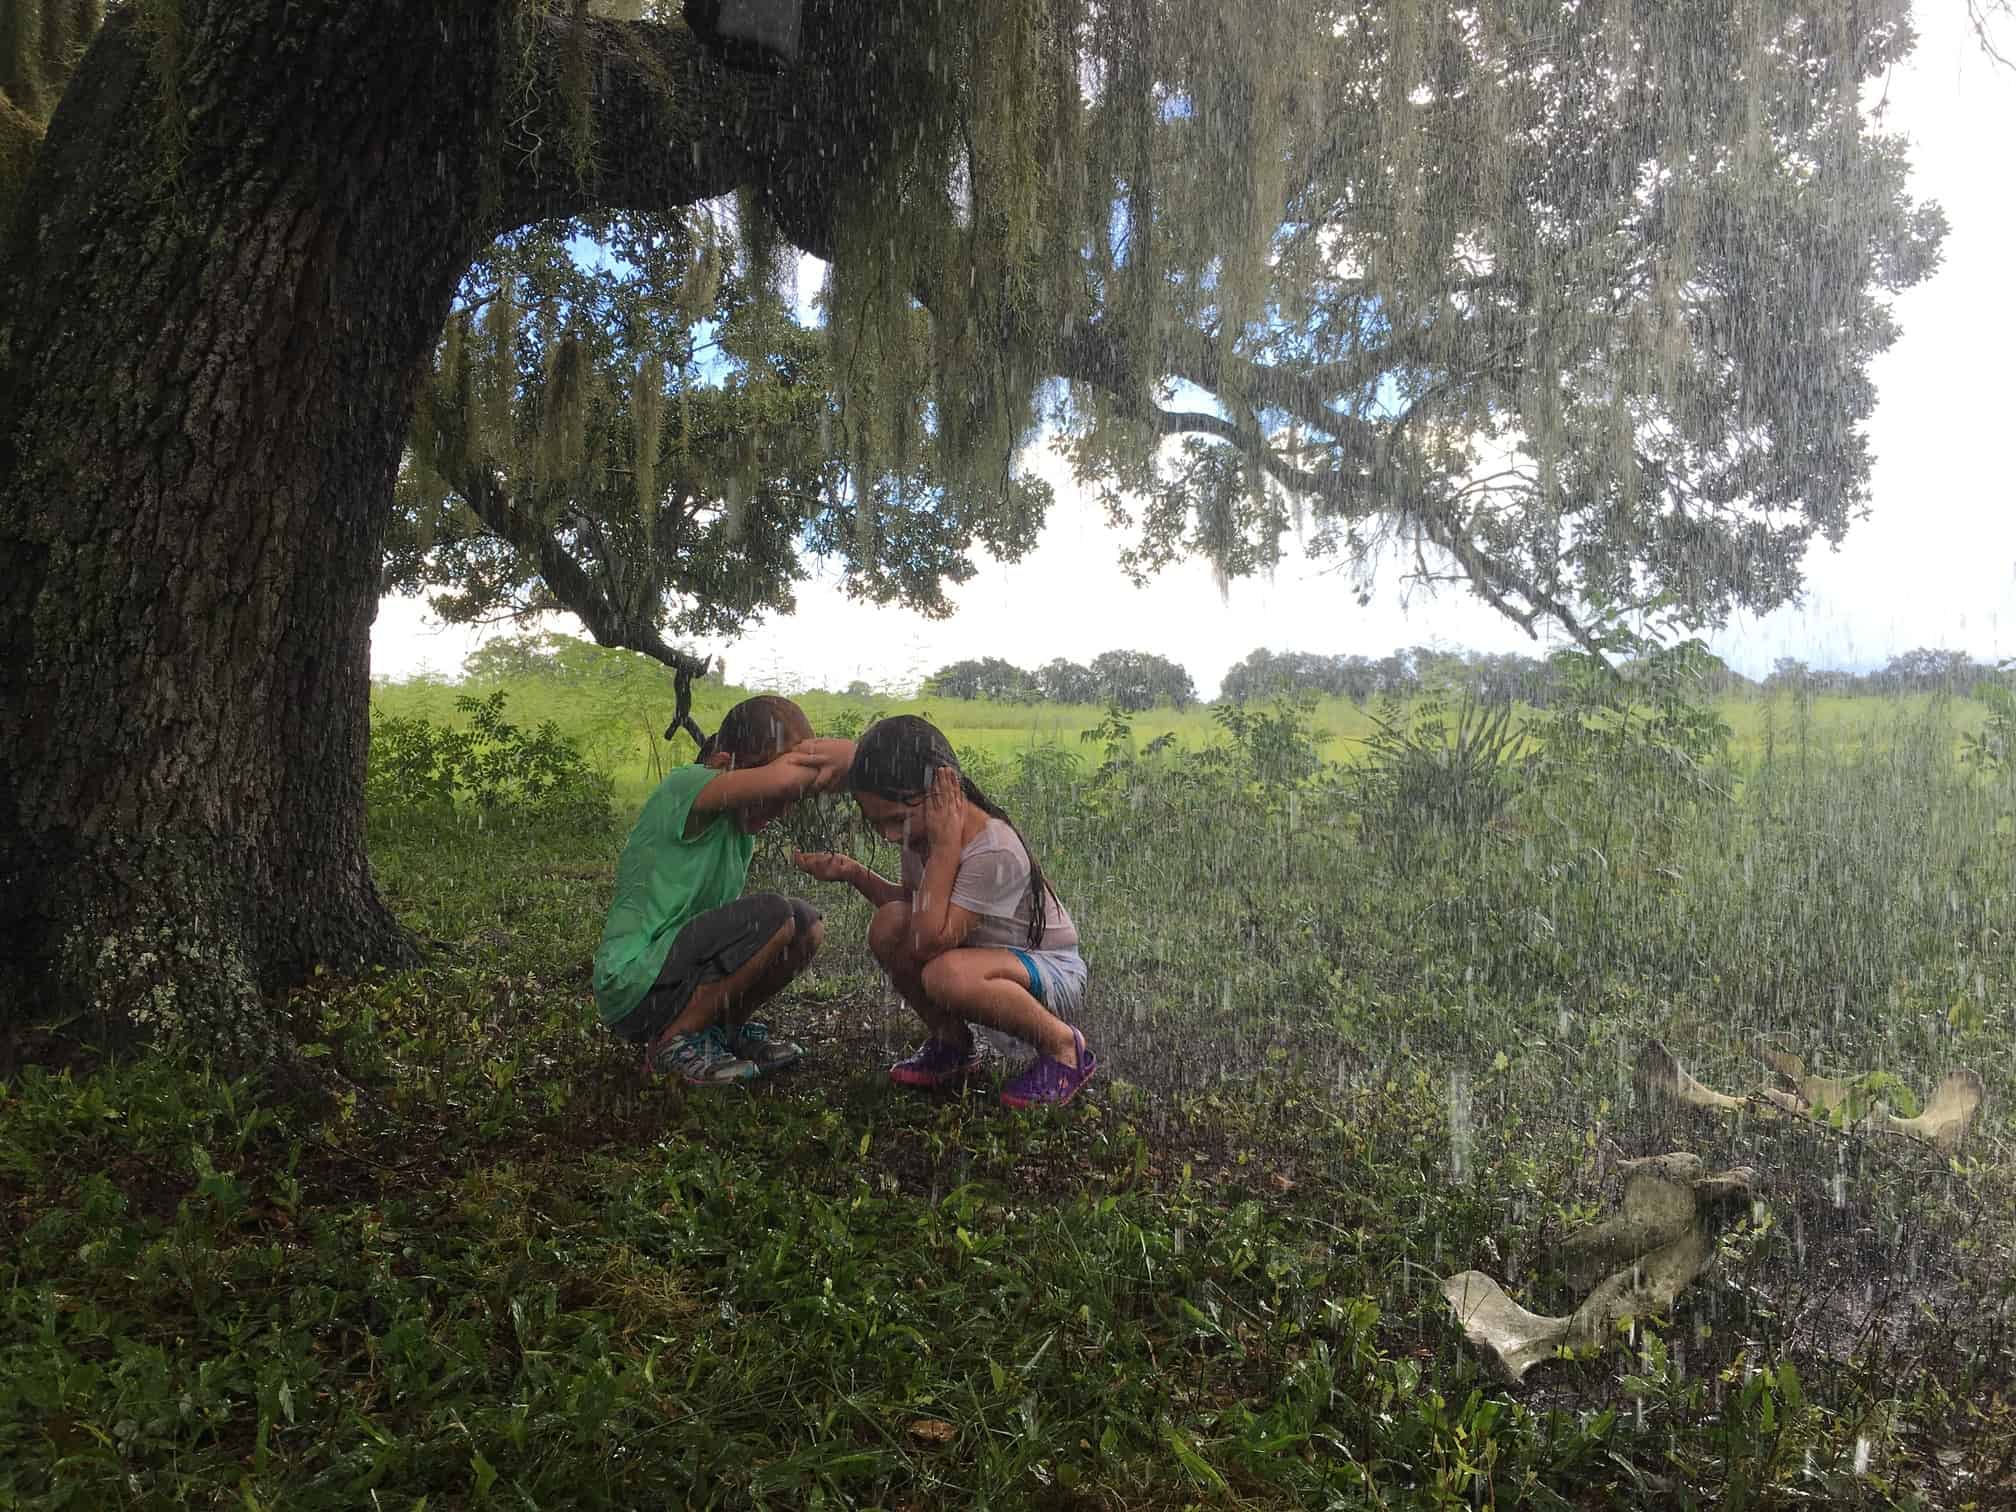 Two girls play in the rain under a willow tree in this image from Cre Film.